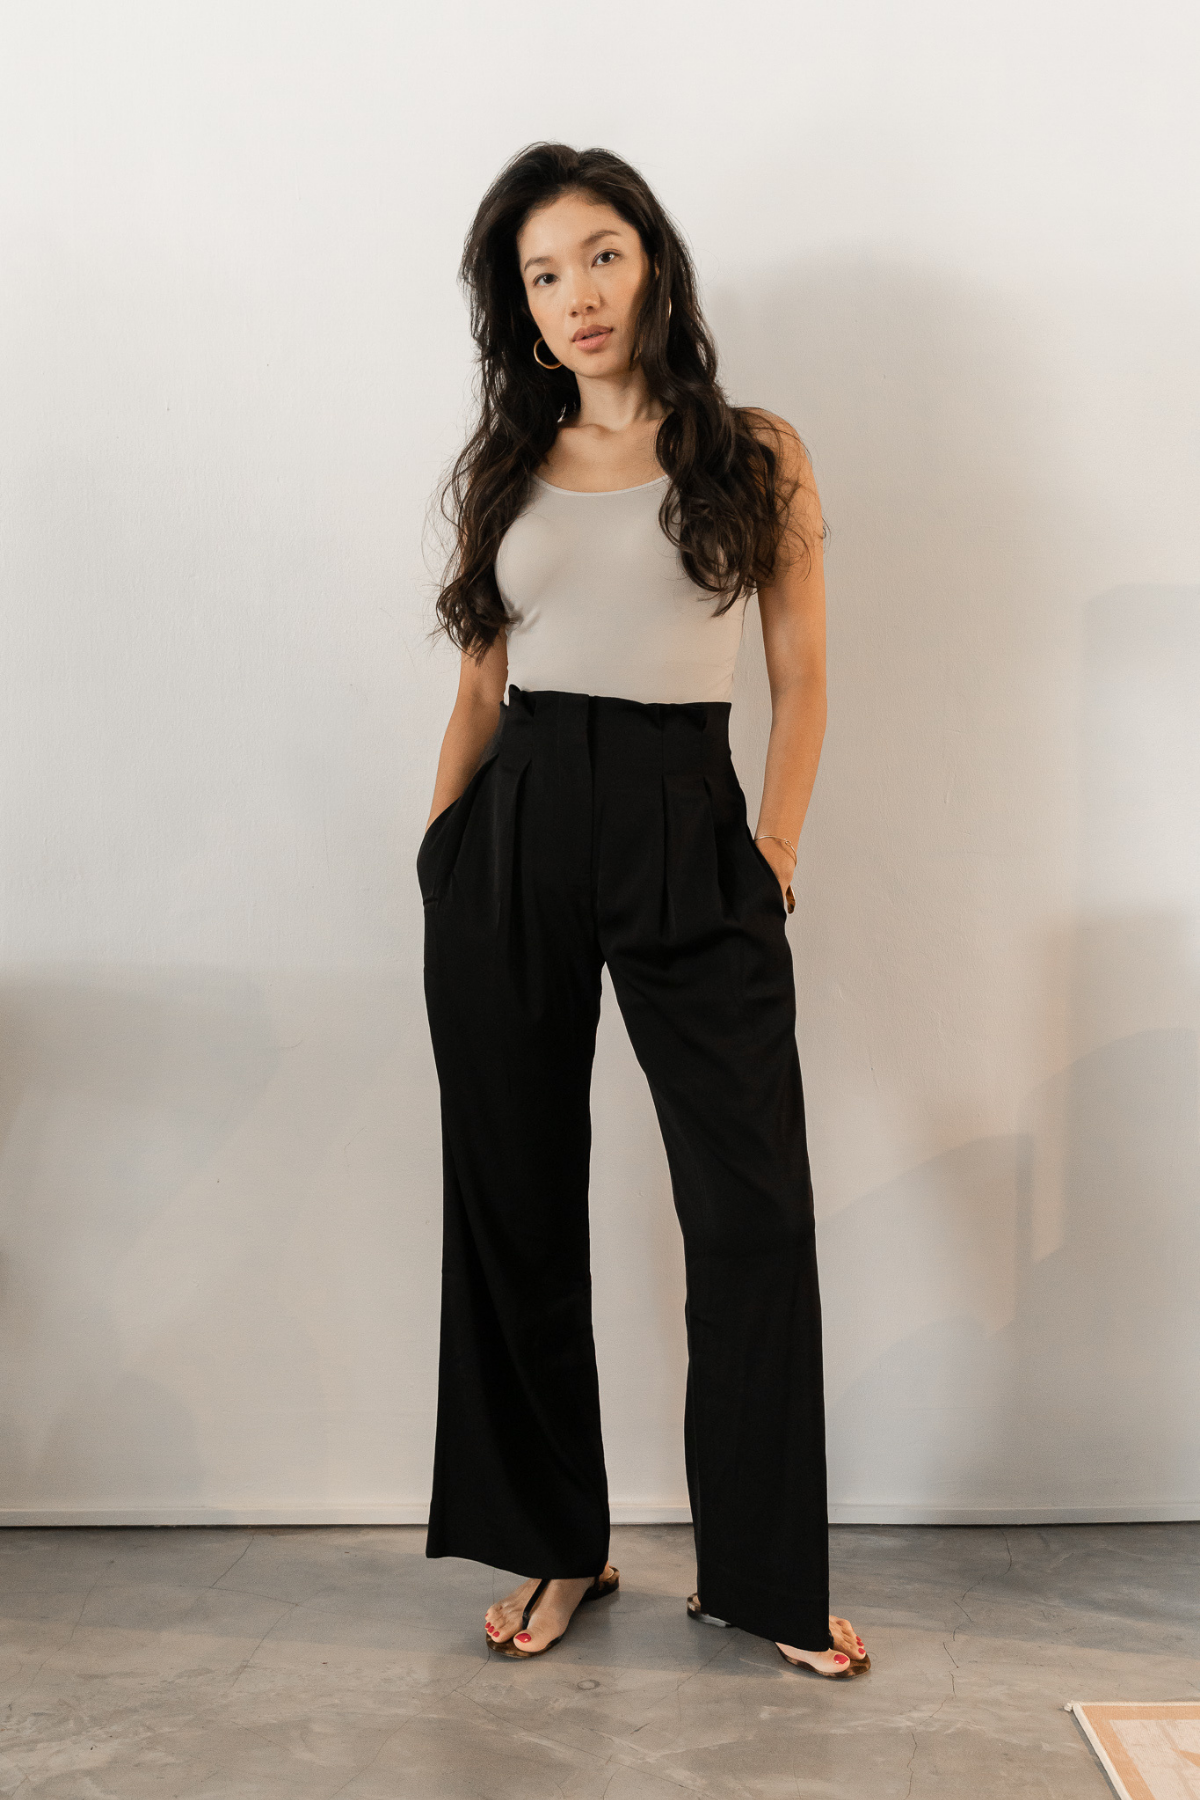 Su By Hand Sammy Pants, available on ZERRIN with free Singapore shipping